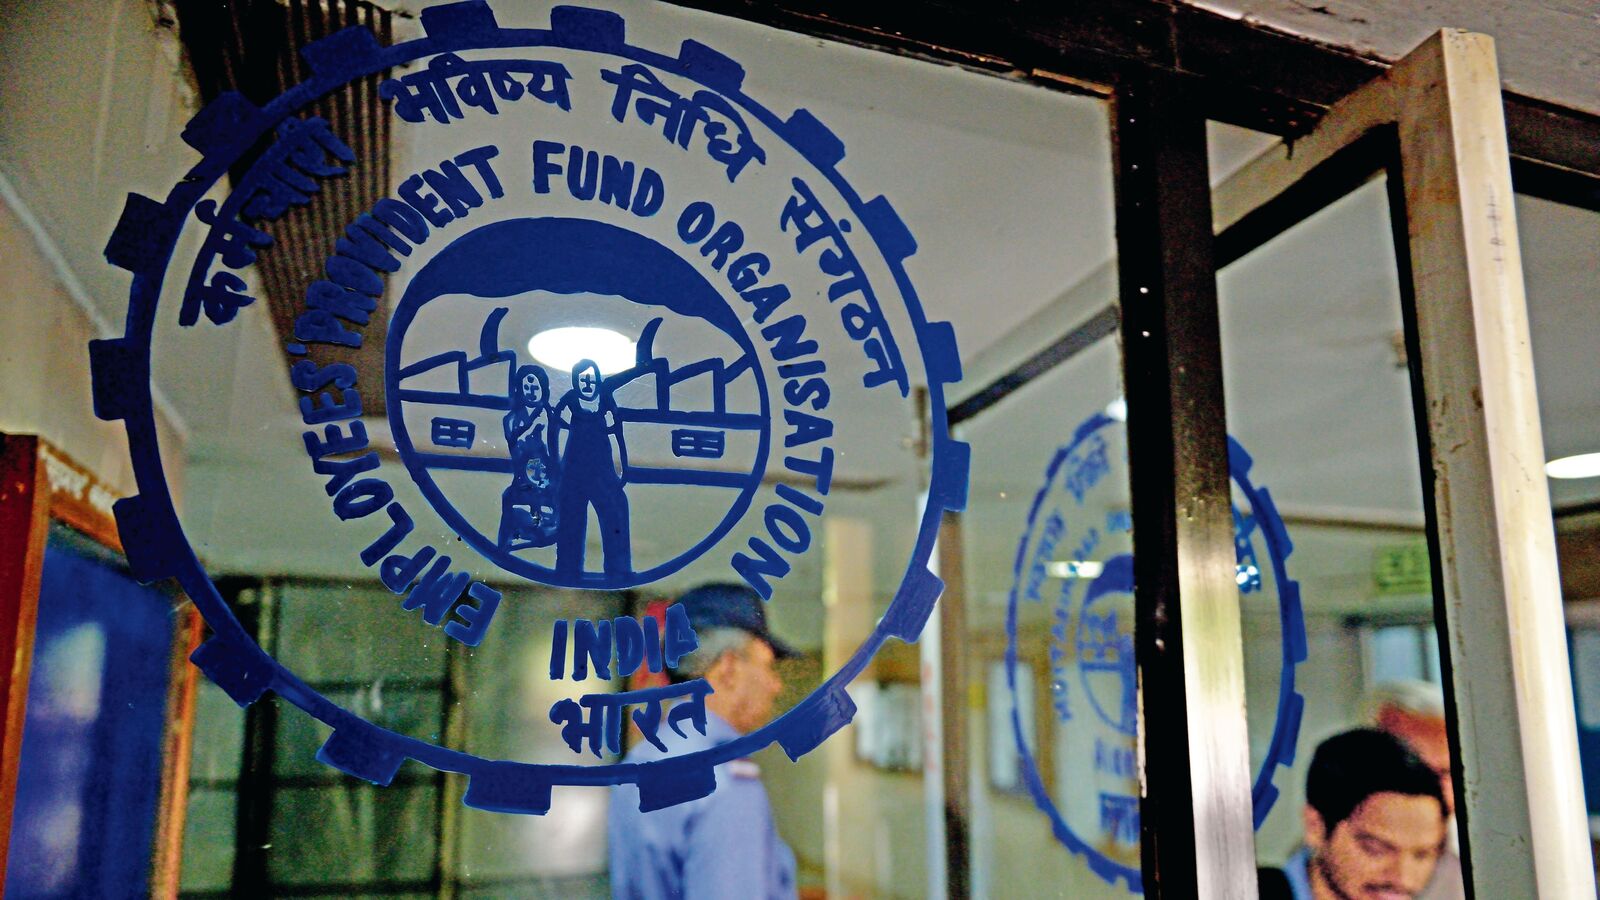 Provident fund contributions: A dilemma for international workers